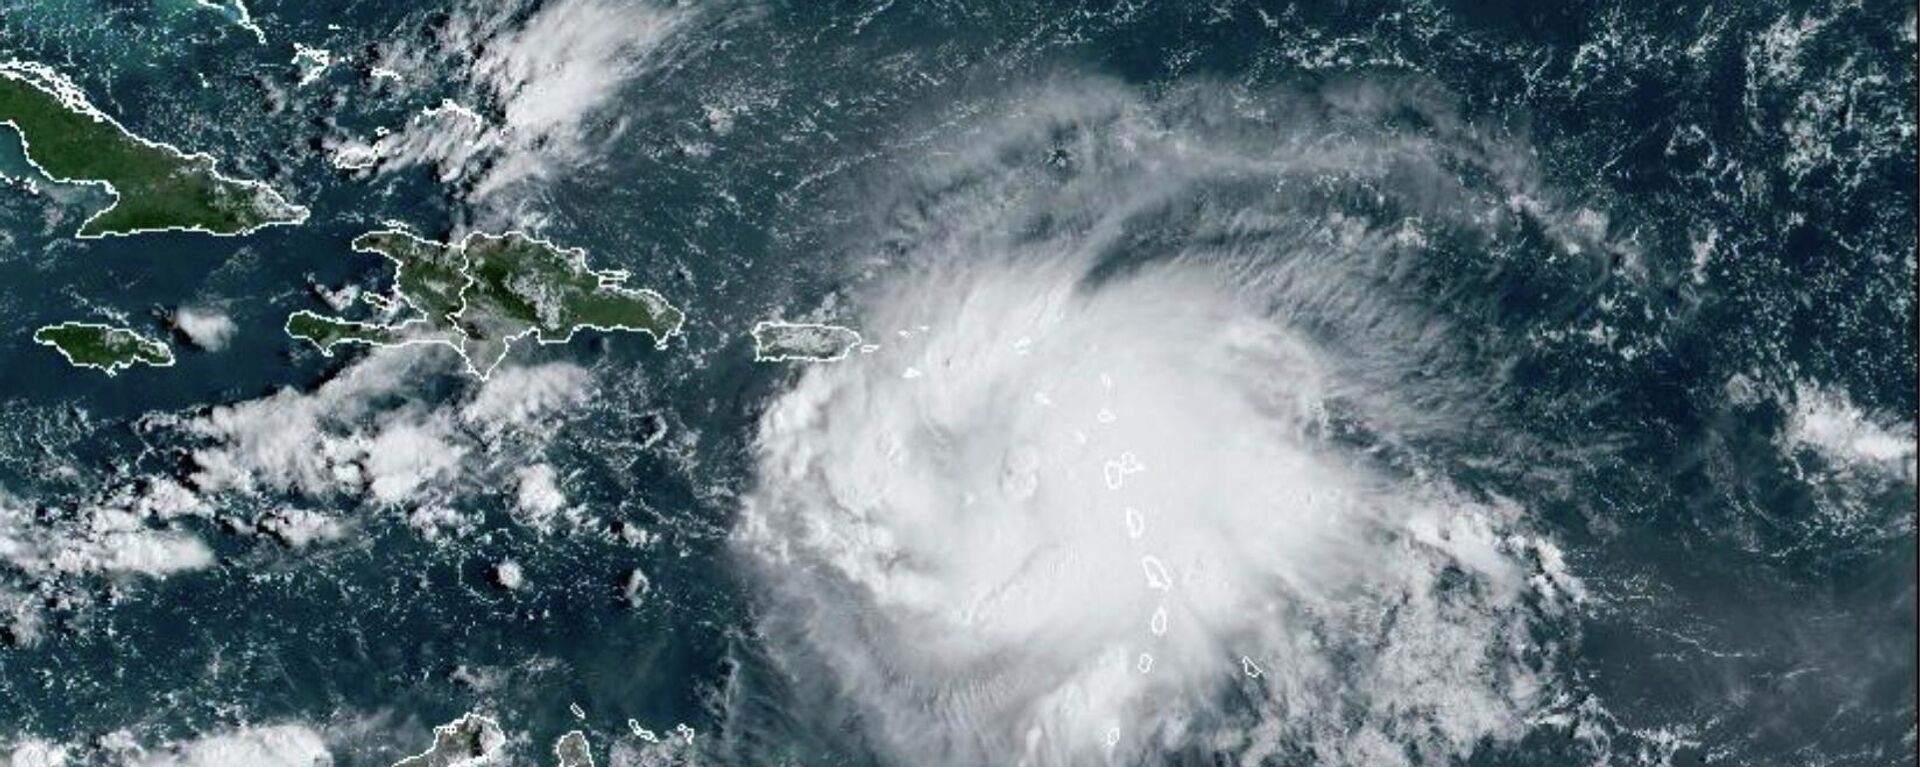 This satellite image provided by NOAA shows Tropical Storm Fiona in the Caribbean on Saturday, Sept. 17, 2022. Fiona threatened to dump up to 16 inches (41 centimeters) of rain in parts of Puerto Rico on Saturday as forecasters placed the U.S. territory under a hurricane watch and people braced for potential landslides, severe flooding and power outages.  - Sputnik International, 1920, 06.01.2023